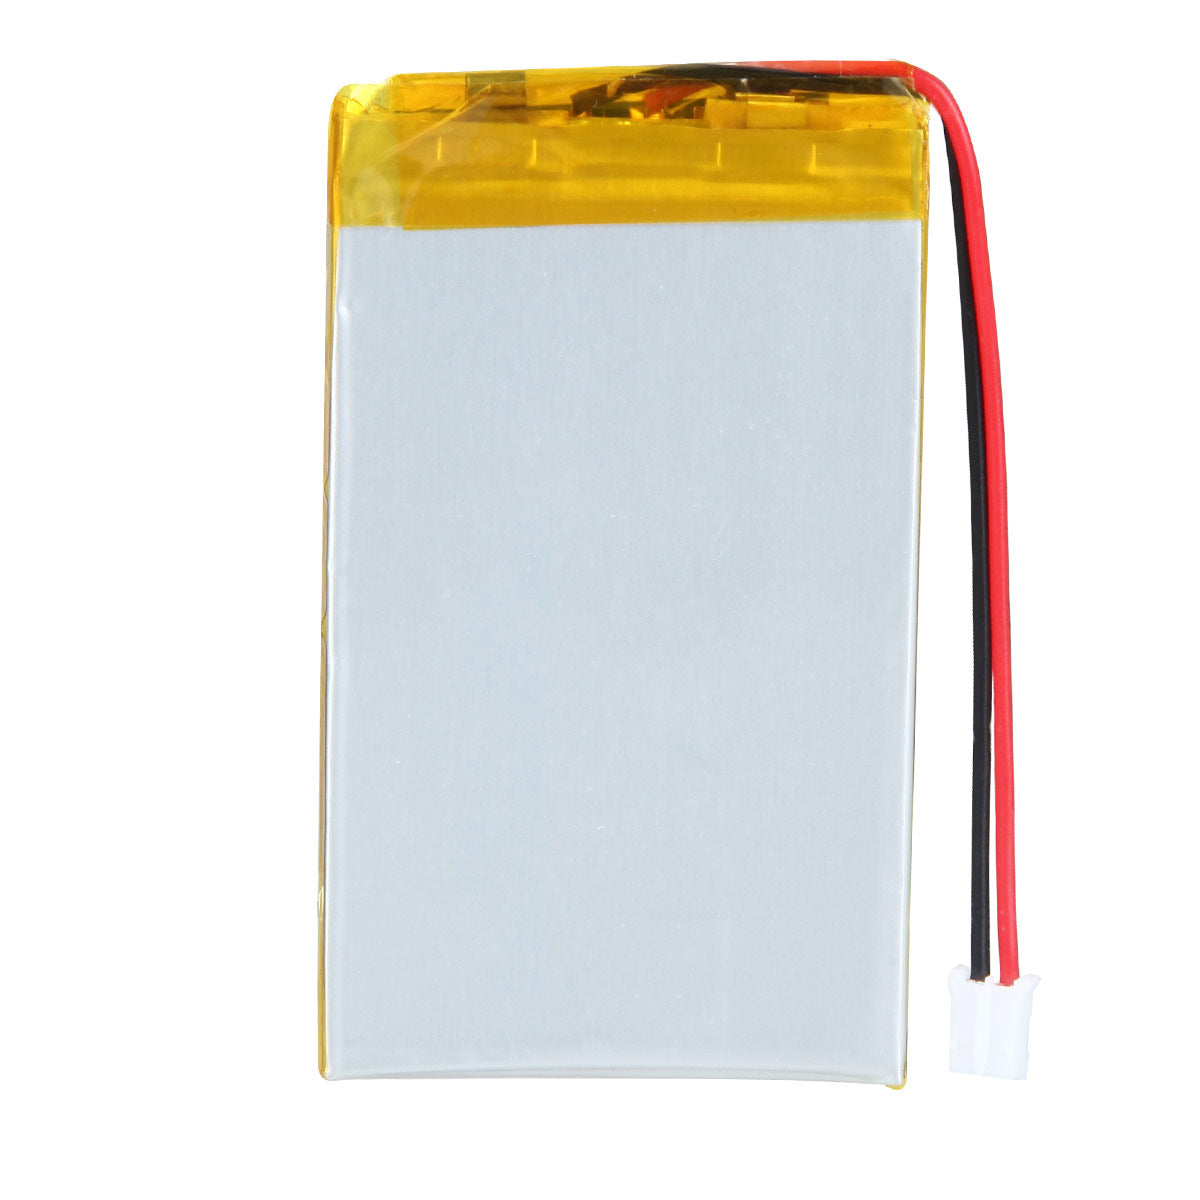 YDL  3.7V 1500mAh 424272 Rechargeable Lithium Polymer Battery Length 74mm